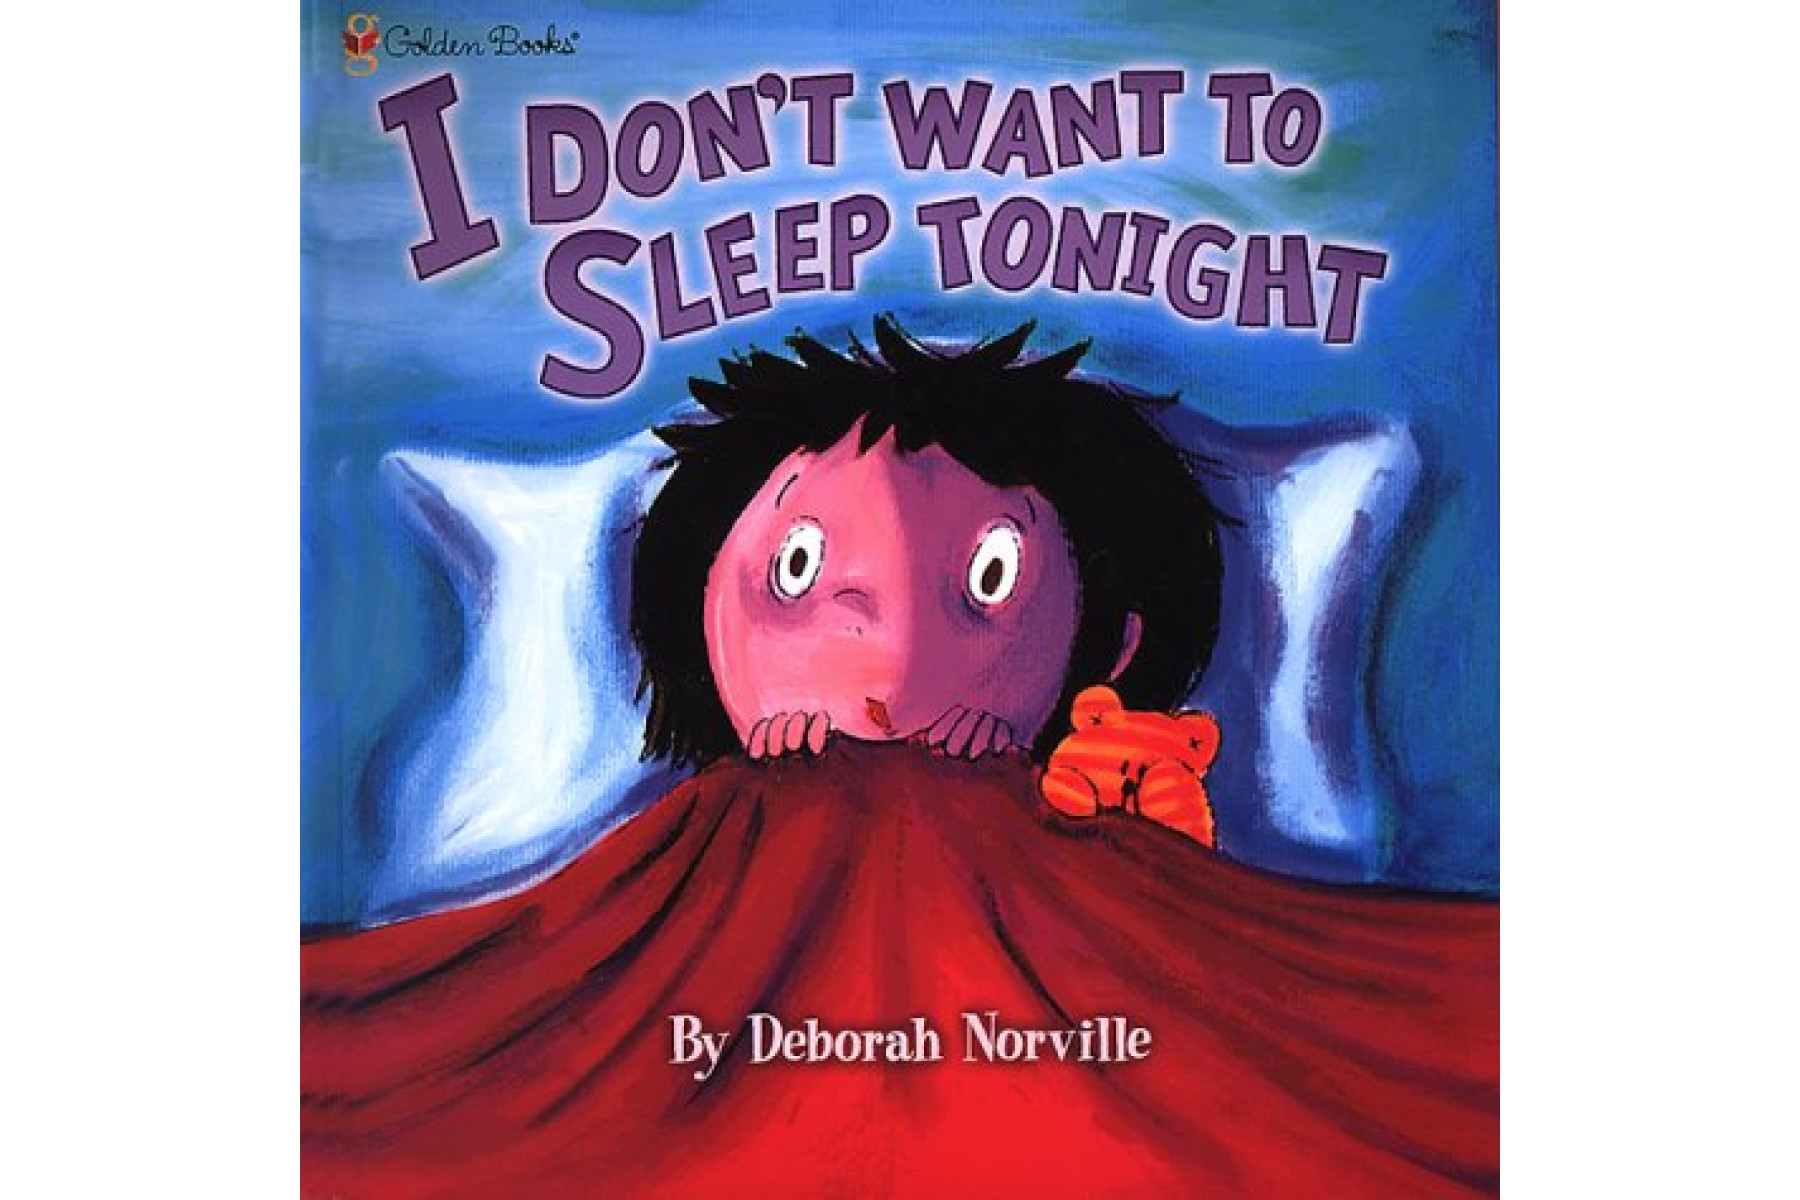 I Don't Want to Sleep Tonight (Pop-Up Book)